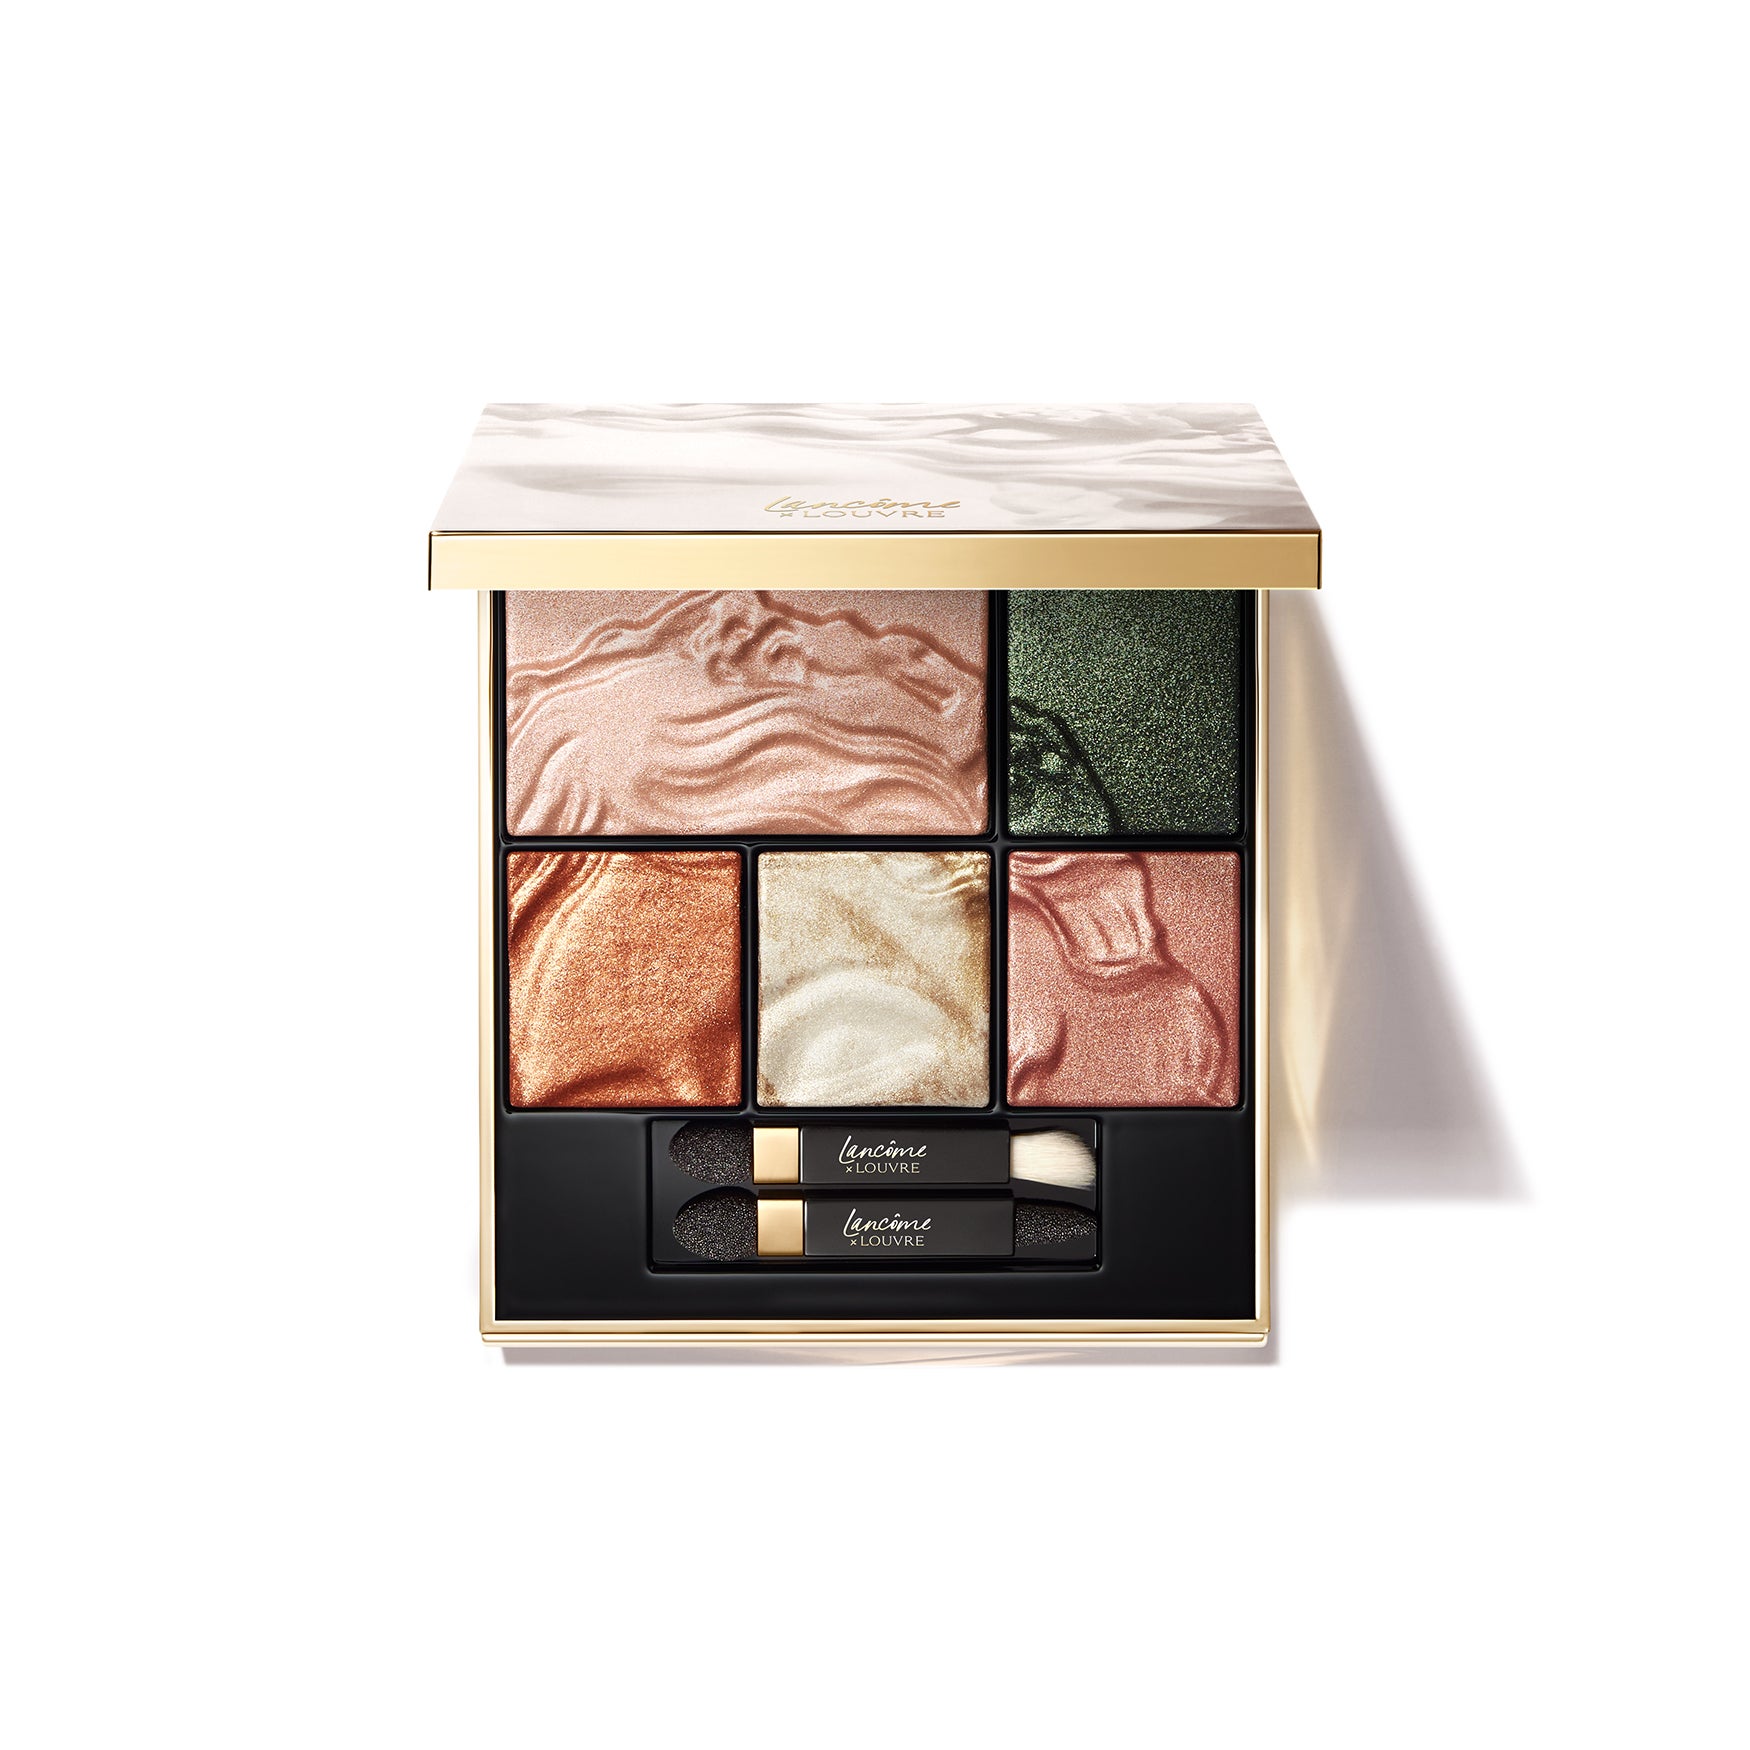 Lancôme, The Louvre Collaborated On A New Makeup Collection